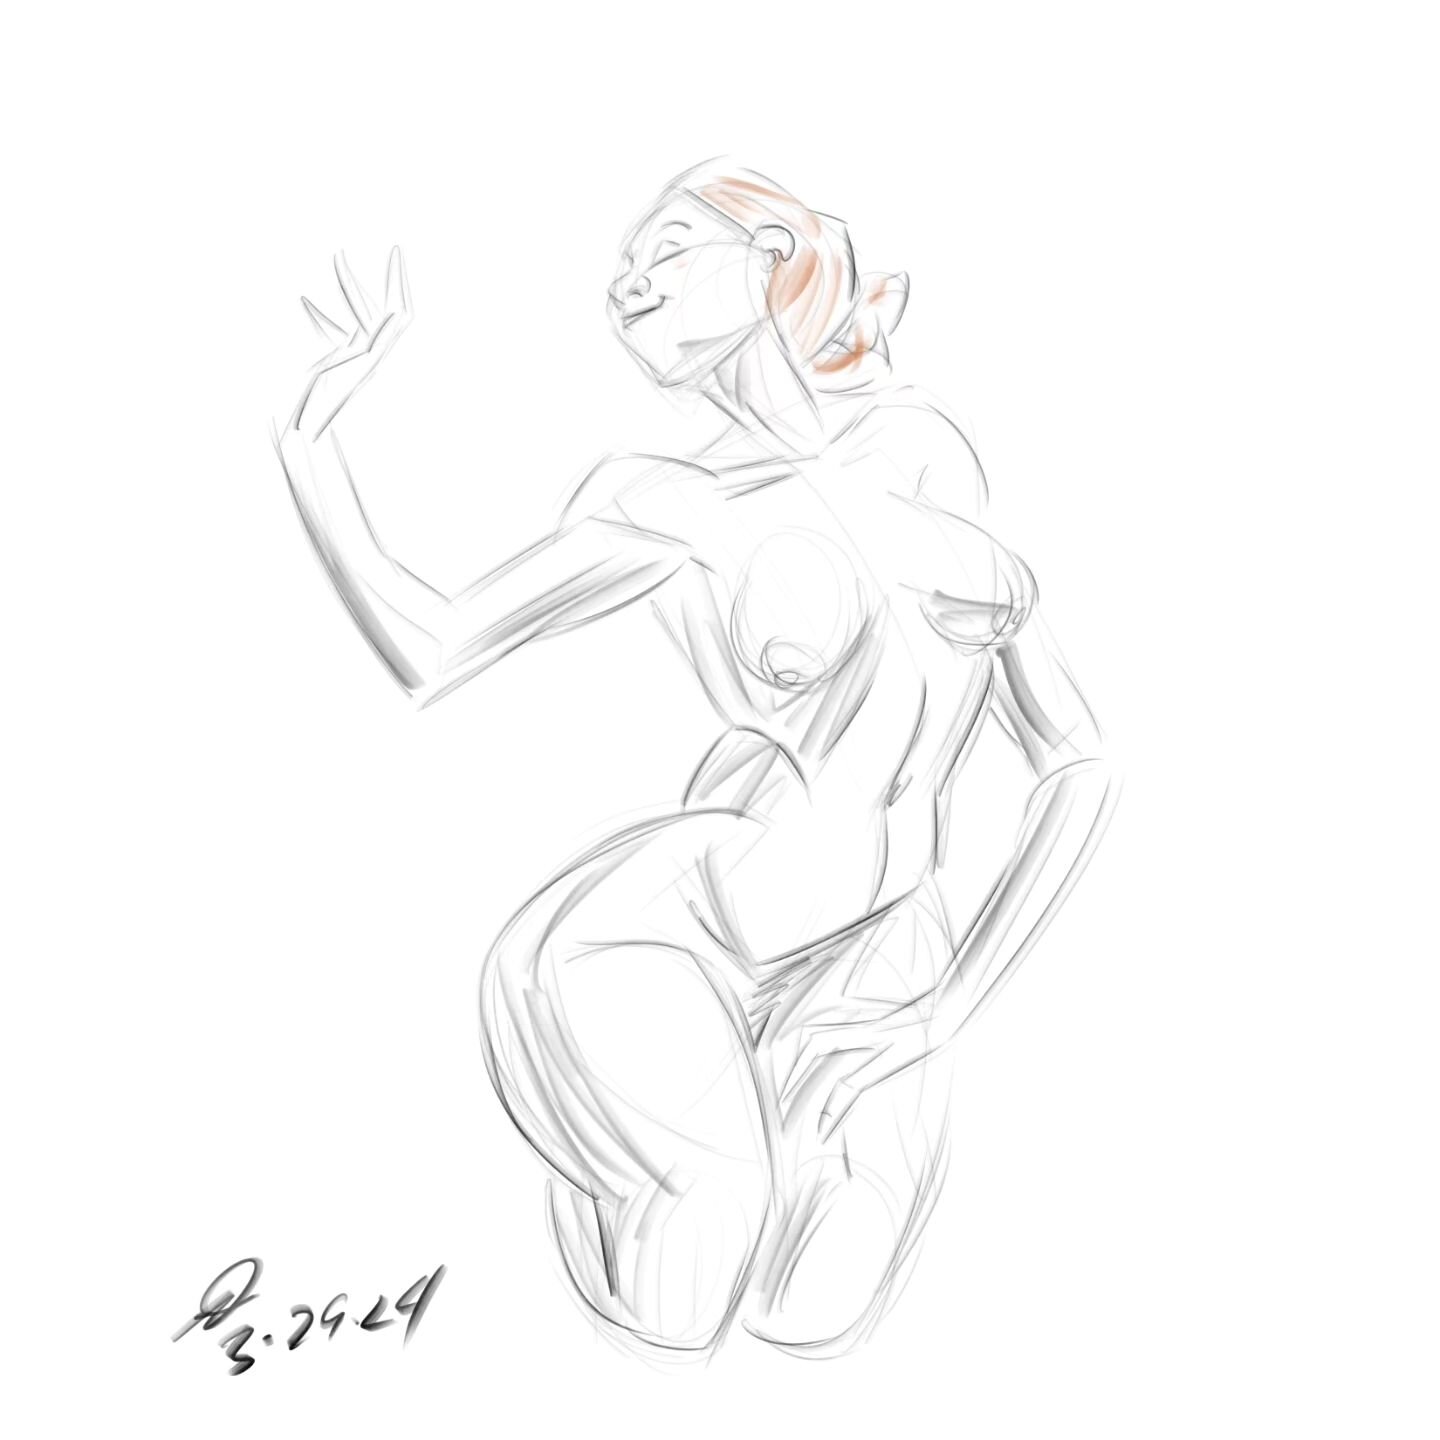 Flowing 5 minute poses of @sofiaartmodel during her first self hosted session. #drawing #sketch #digitalart #digitaldrawing #lifedrawing #figuredrawing